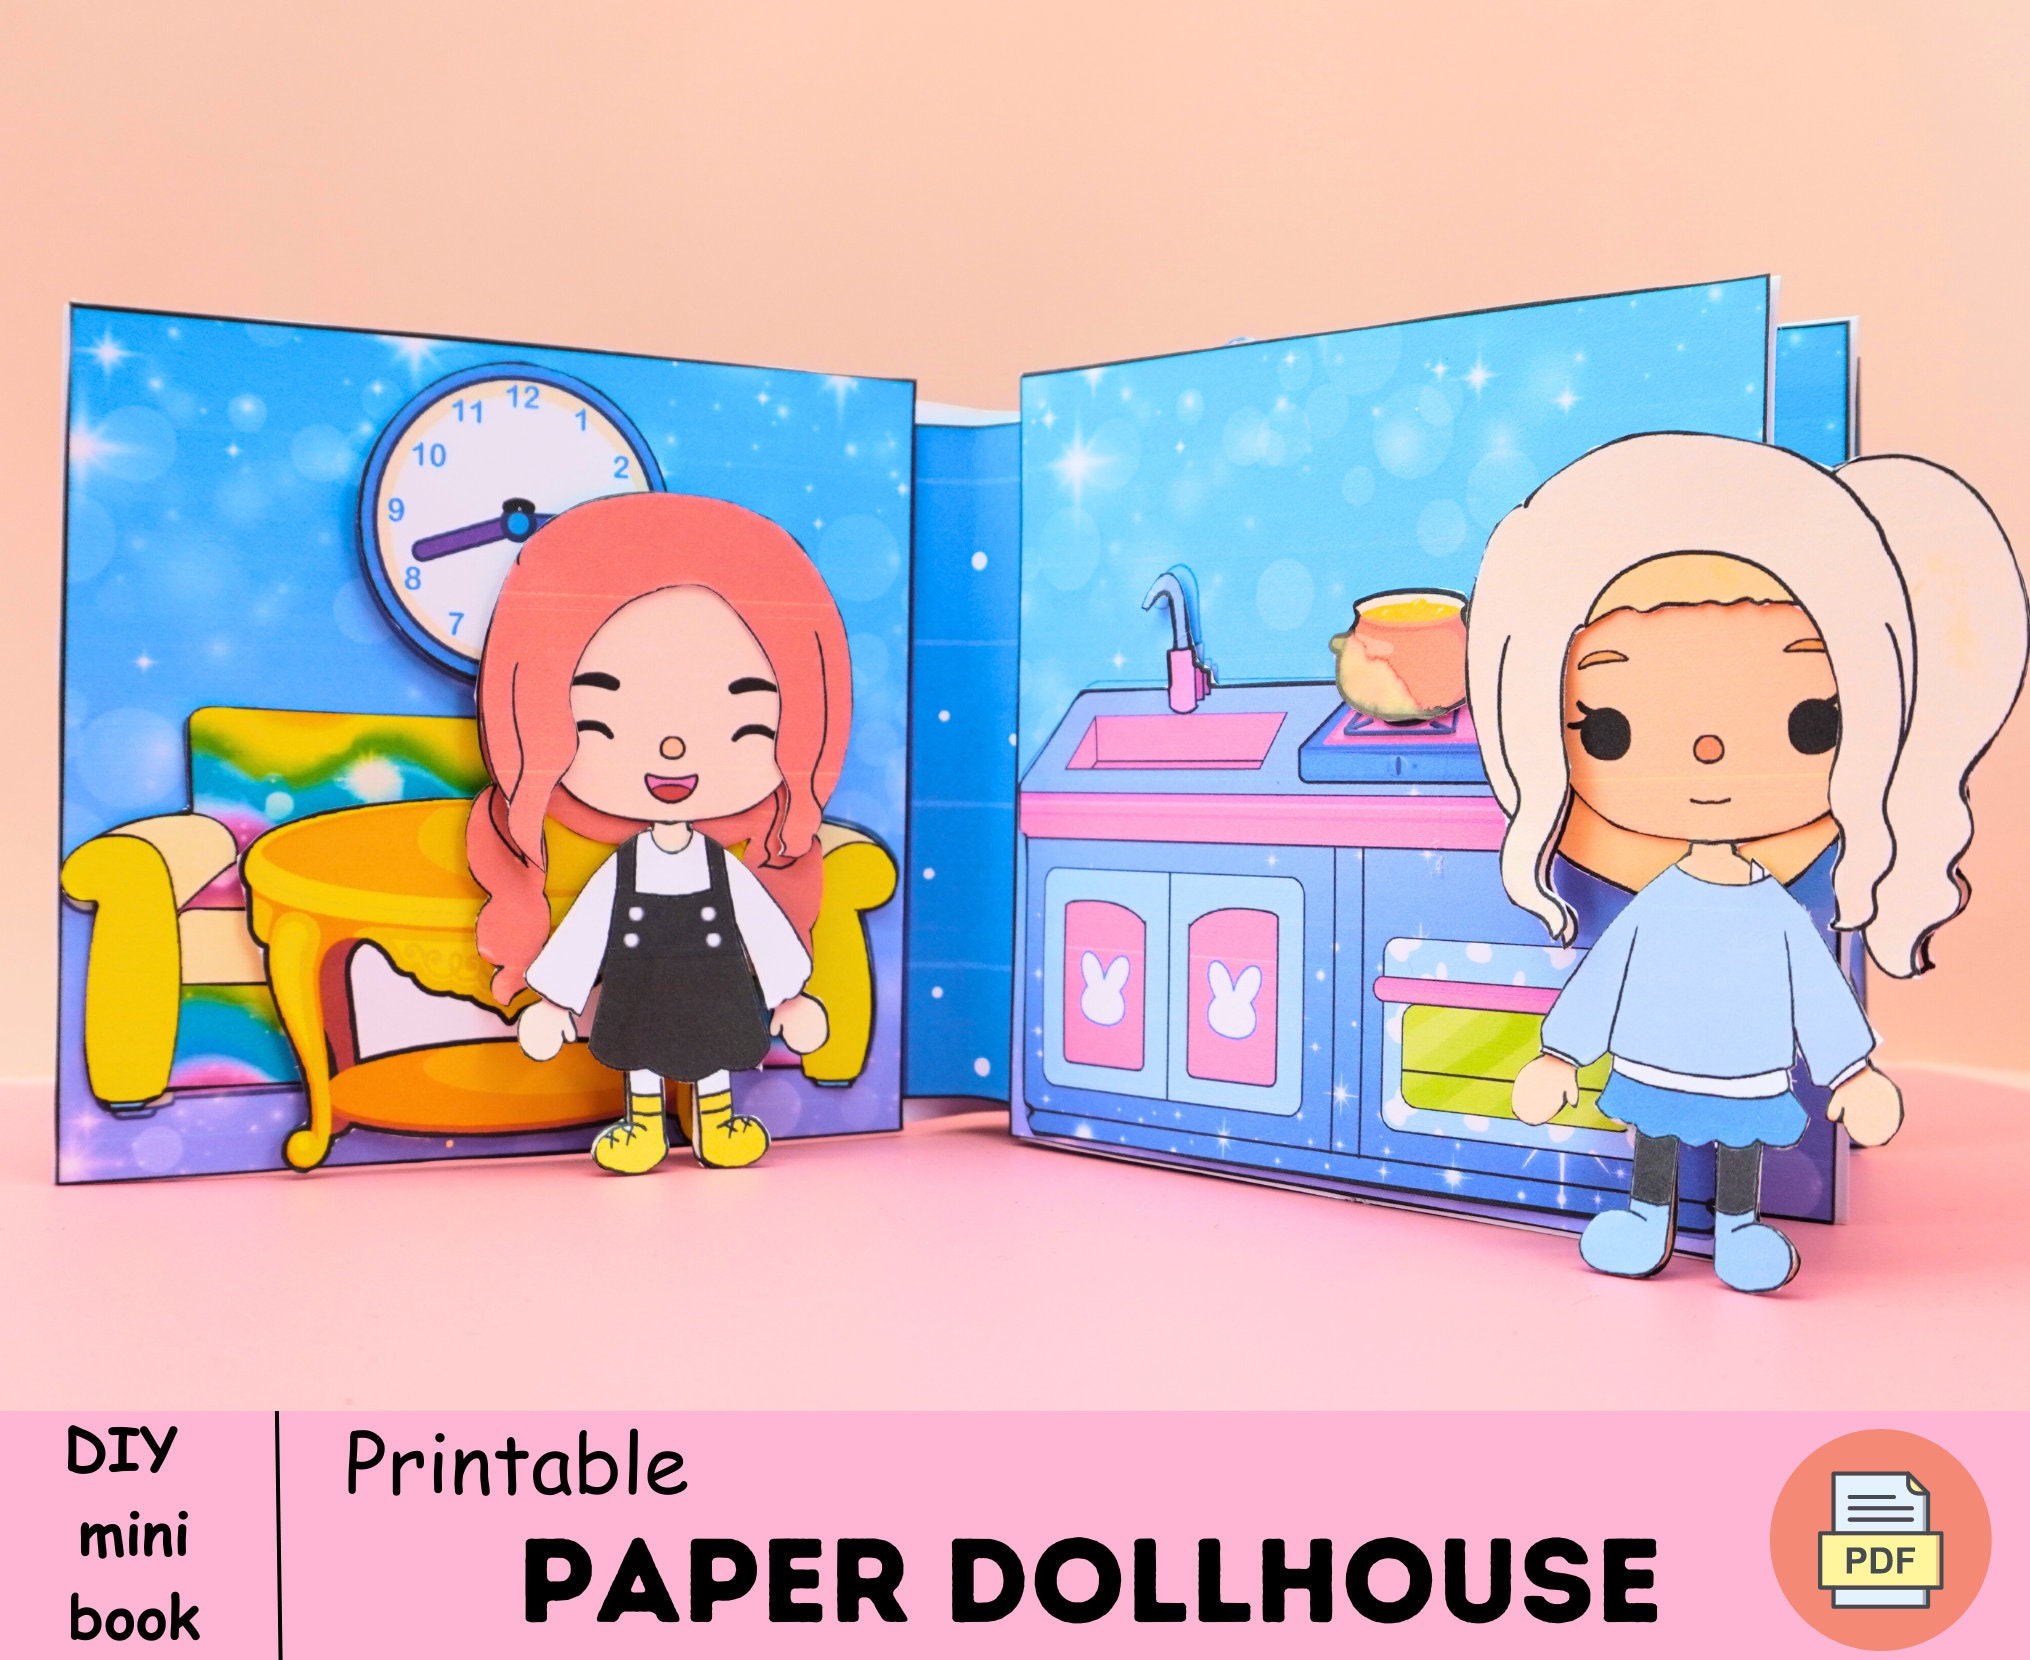 Pink and purple toca boca paper house for baby 🌸 Toca boca pre-printed –  WOA DOLL CRAFT